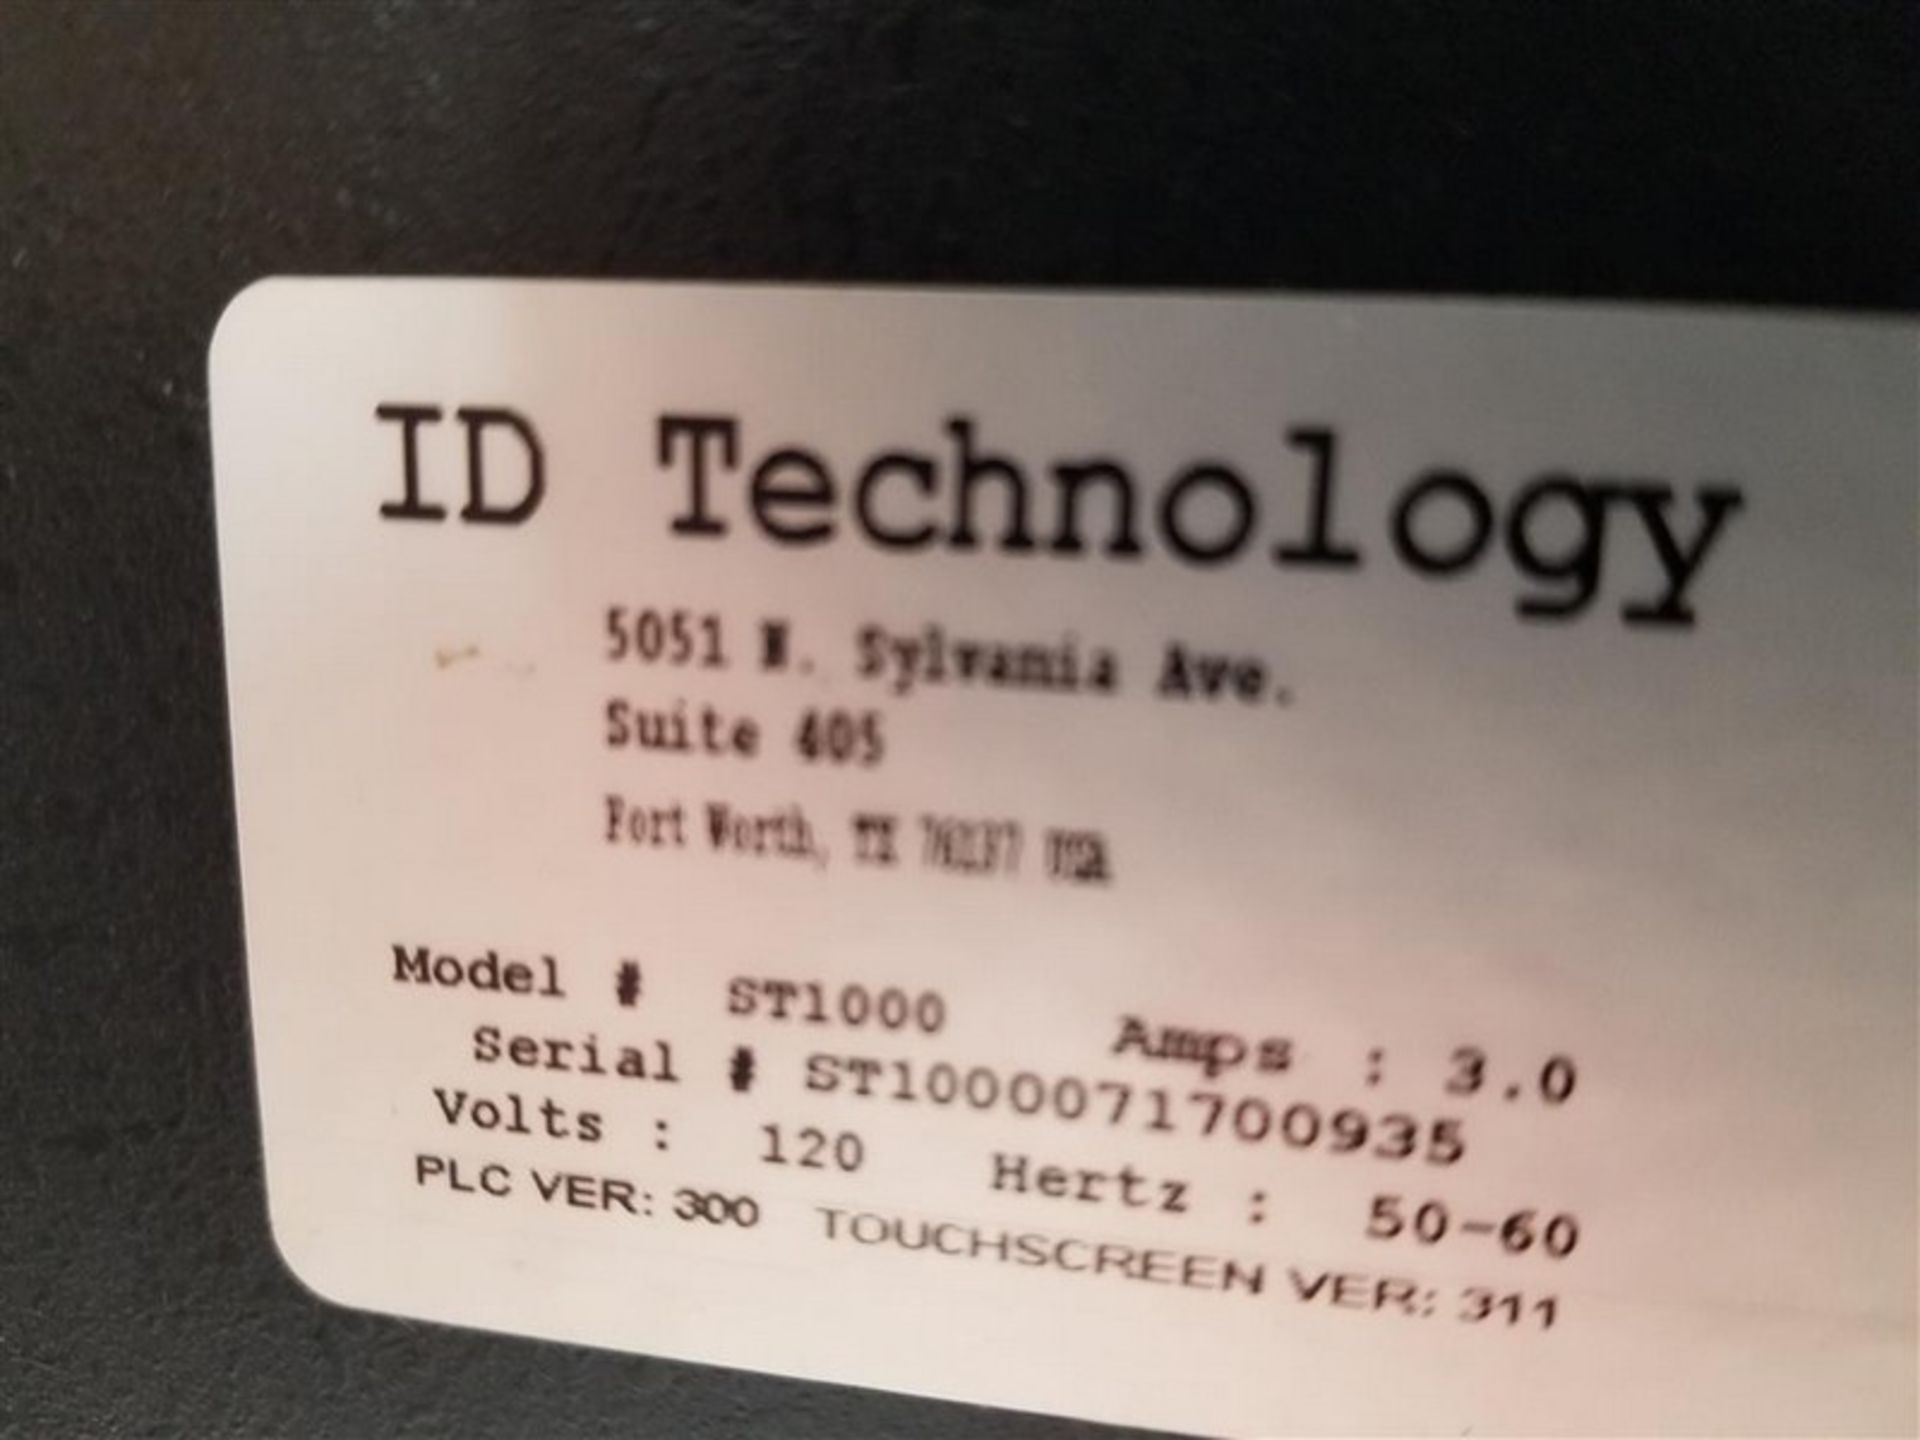 ID Technology Label Printer, Model ST1000, S/N ST1000071700935, Volt 120, Touchscreen Version 311 - Image 5 of 5